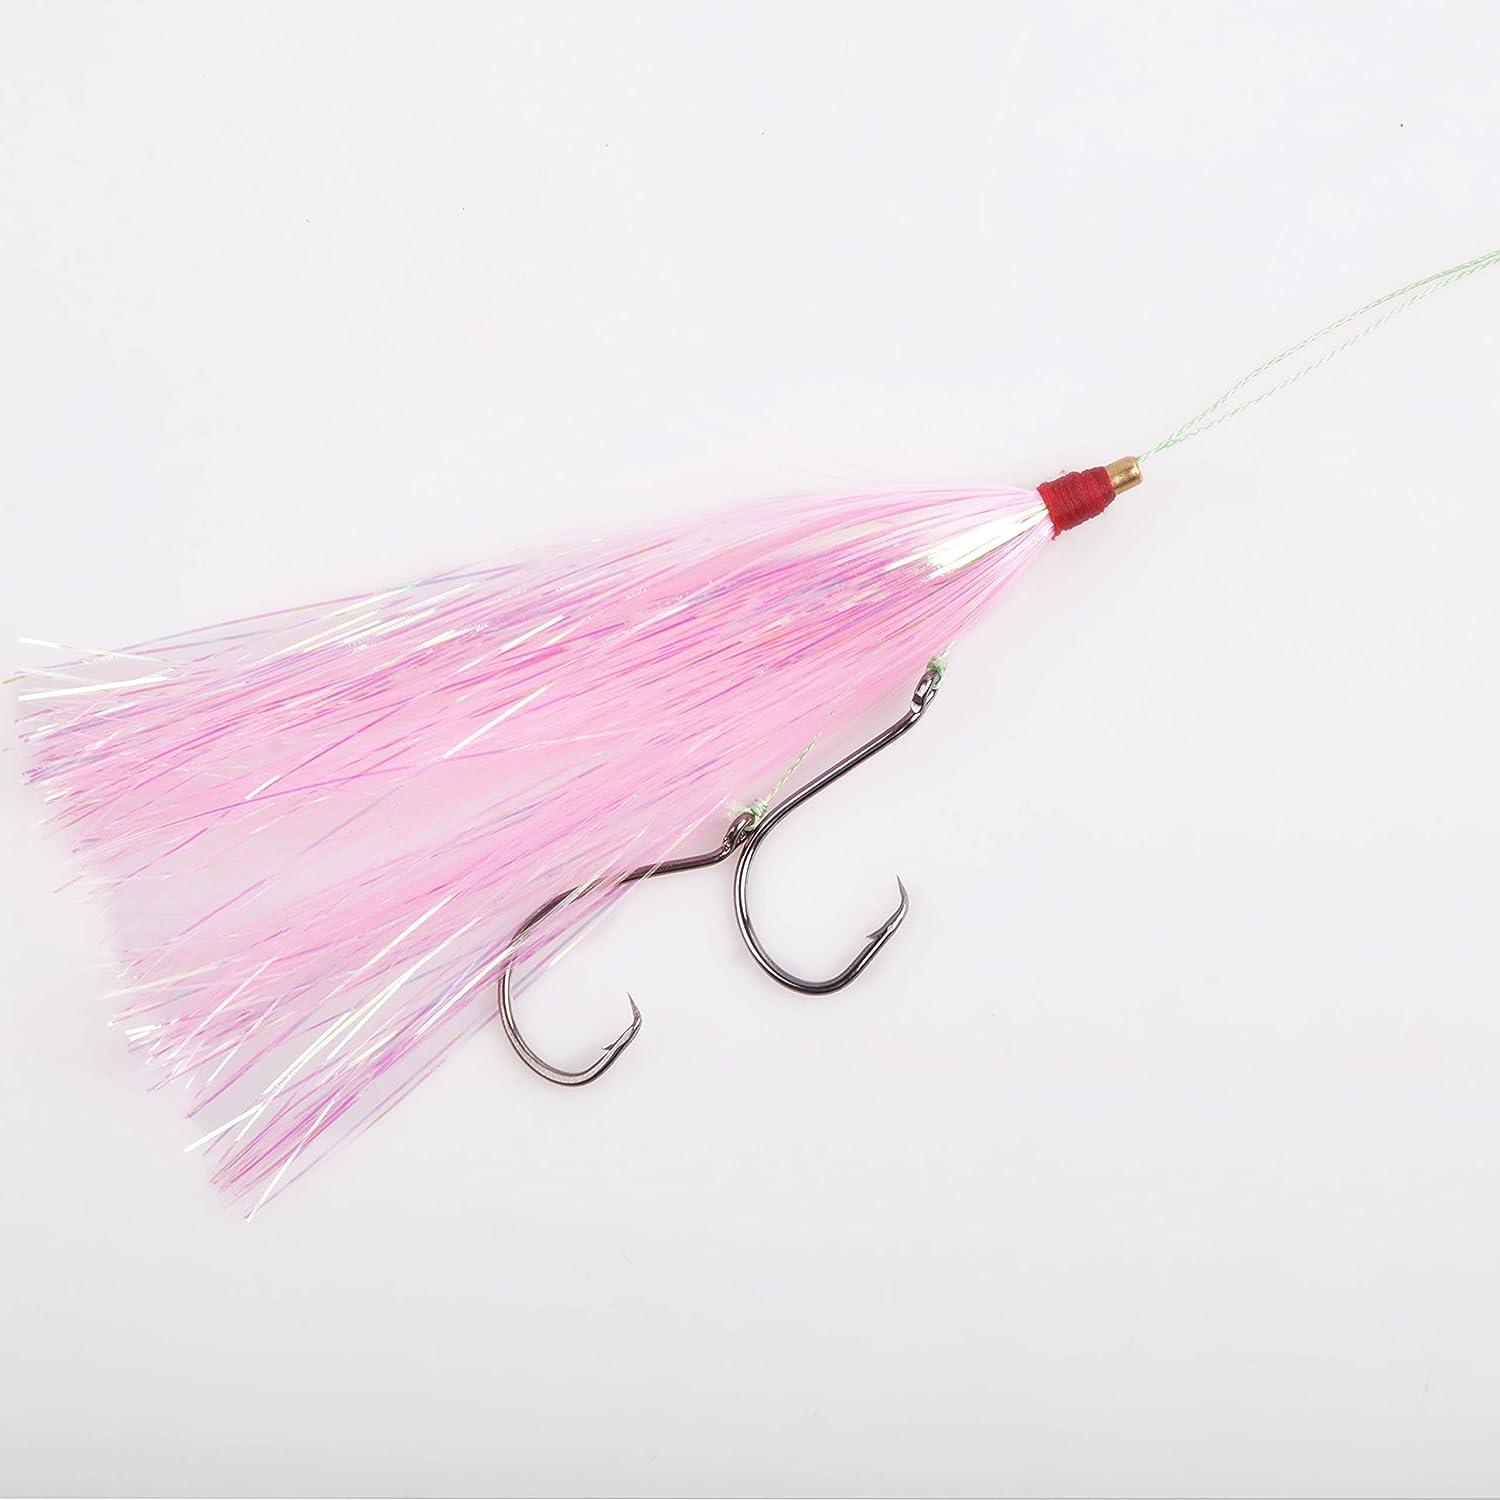 Fishing Teasers -12/18pcs Squid Teaser Fishing Mylar Flash Fishing Teaser  Tail Fishing Teaser for Fluke Rigs for Saltwater Fishing Lure 3 Colors  Three Colors Mixed-18pcs